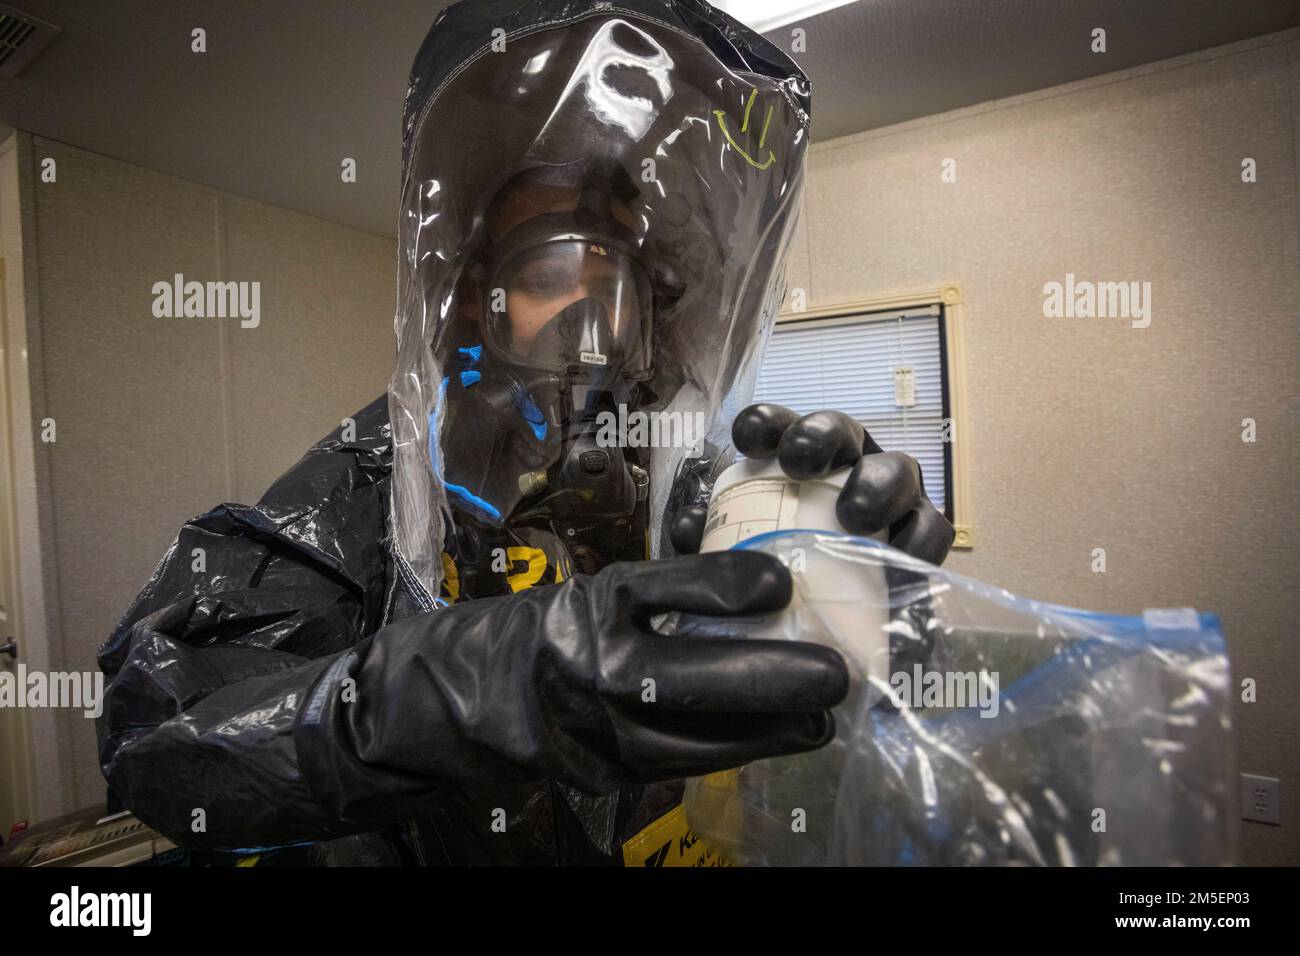 U.S. Army Staff Sgt. Nicky Lam, survey team member with the 21st Weapons of Mass Destruction-Civil Support Team (21st WMD-CST), New Jersey National Guard, packages a sample at a simulated crime scene during an Army North training exercise at the William J. Hughes Technical Center, Federal Aviation Administration, Egg Harbor Township, New Jersey, March 3, 2022. The 21st identifies chemical, biological, radiological, and nuclear substances; assesses and advises civil authorities on response measures to man-made or natural disasters. (New Jersey National Guard photo by Mark C. Olsen) Stock Photo